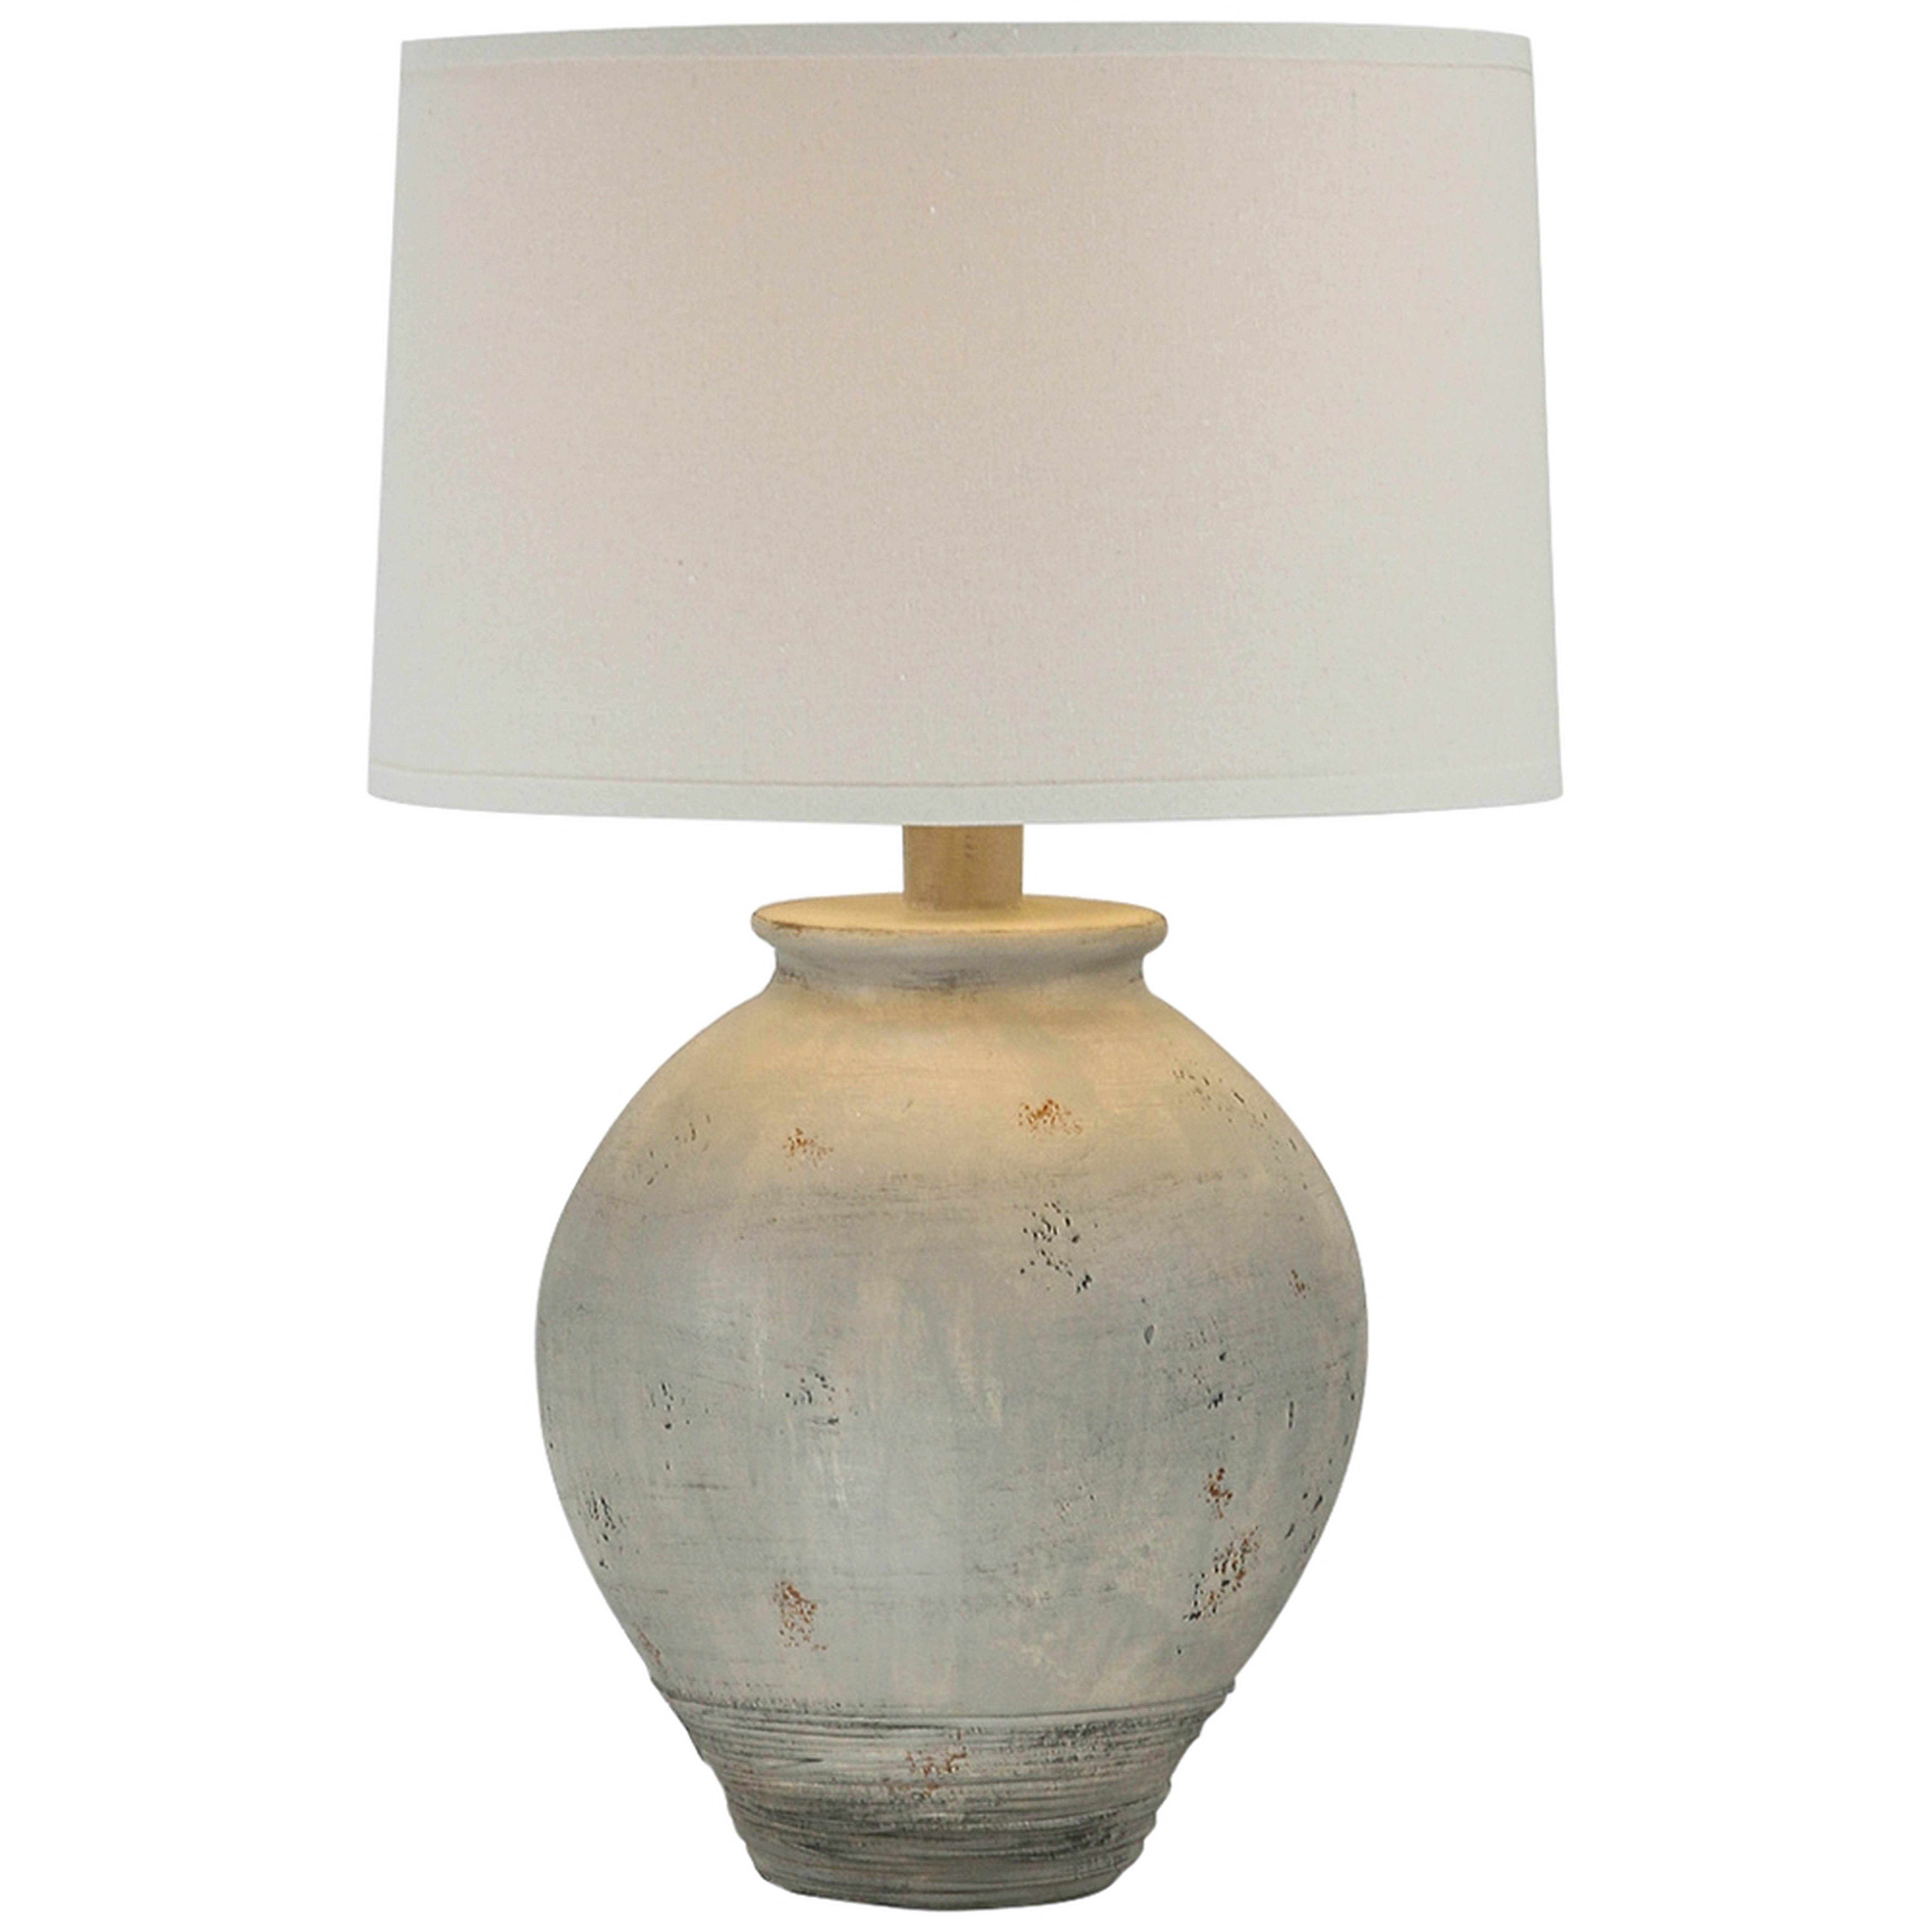 Ryker Concrete Stone Hydrocal Urn Table Lamp - Style # 979P0 - Lamps Plus